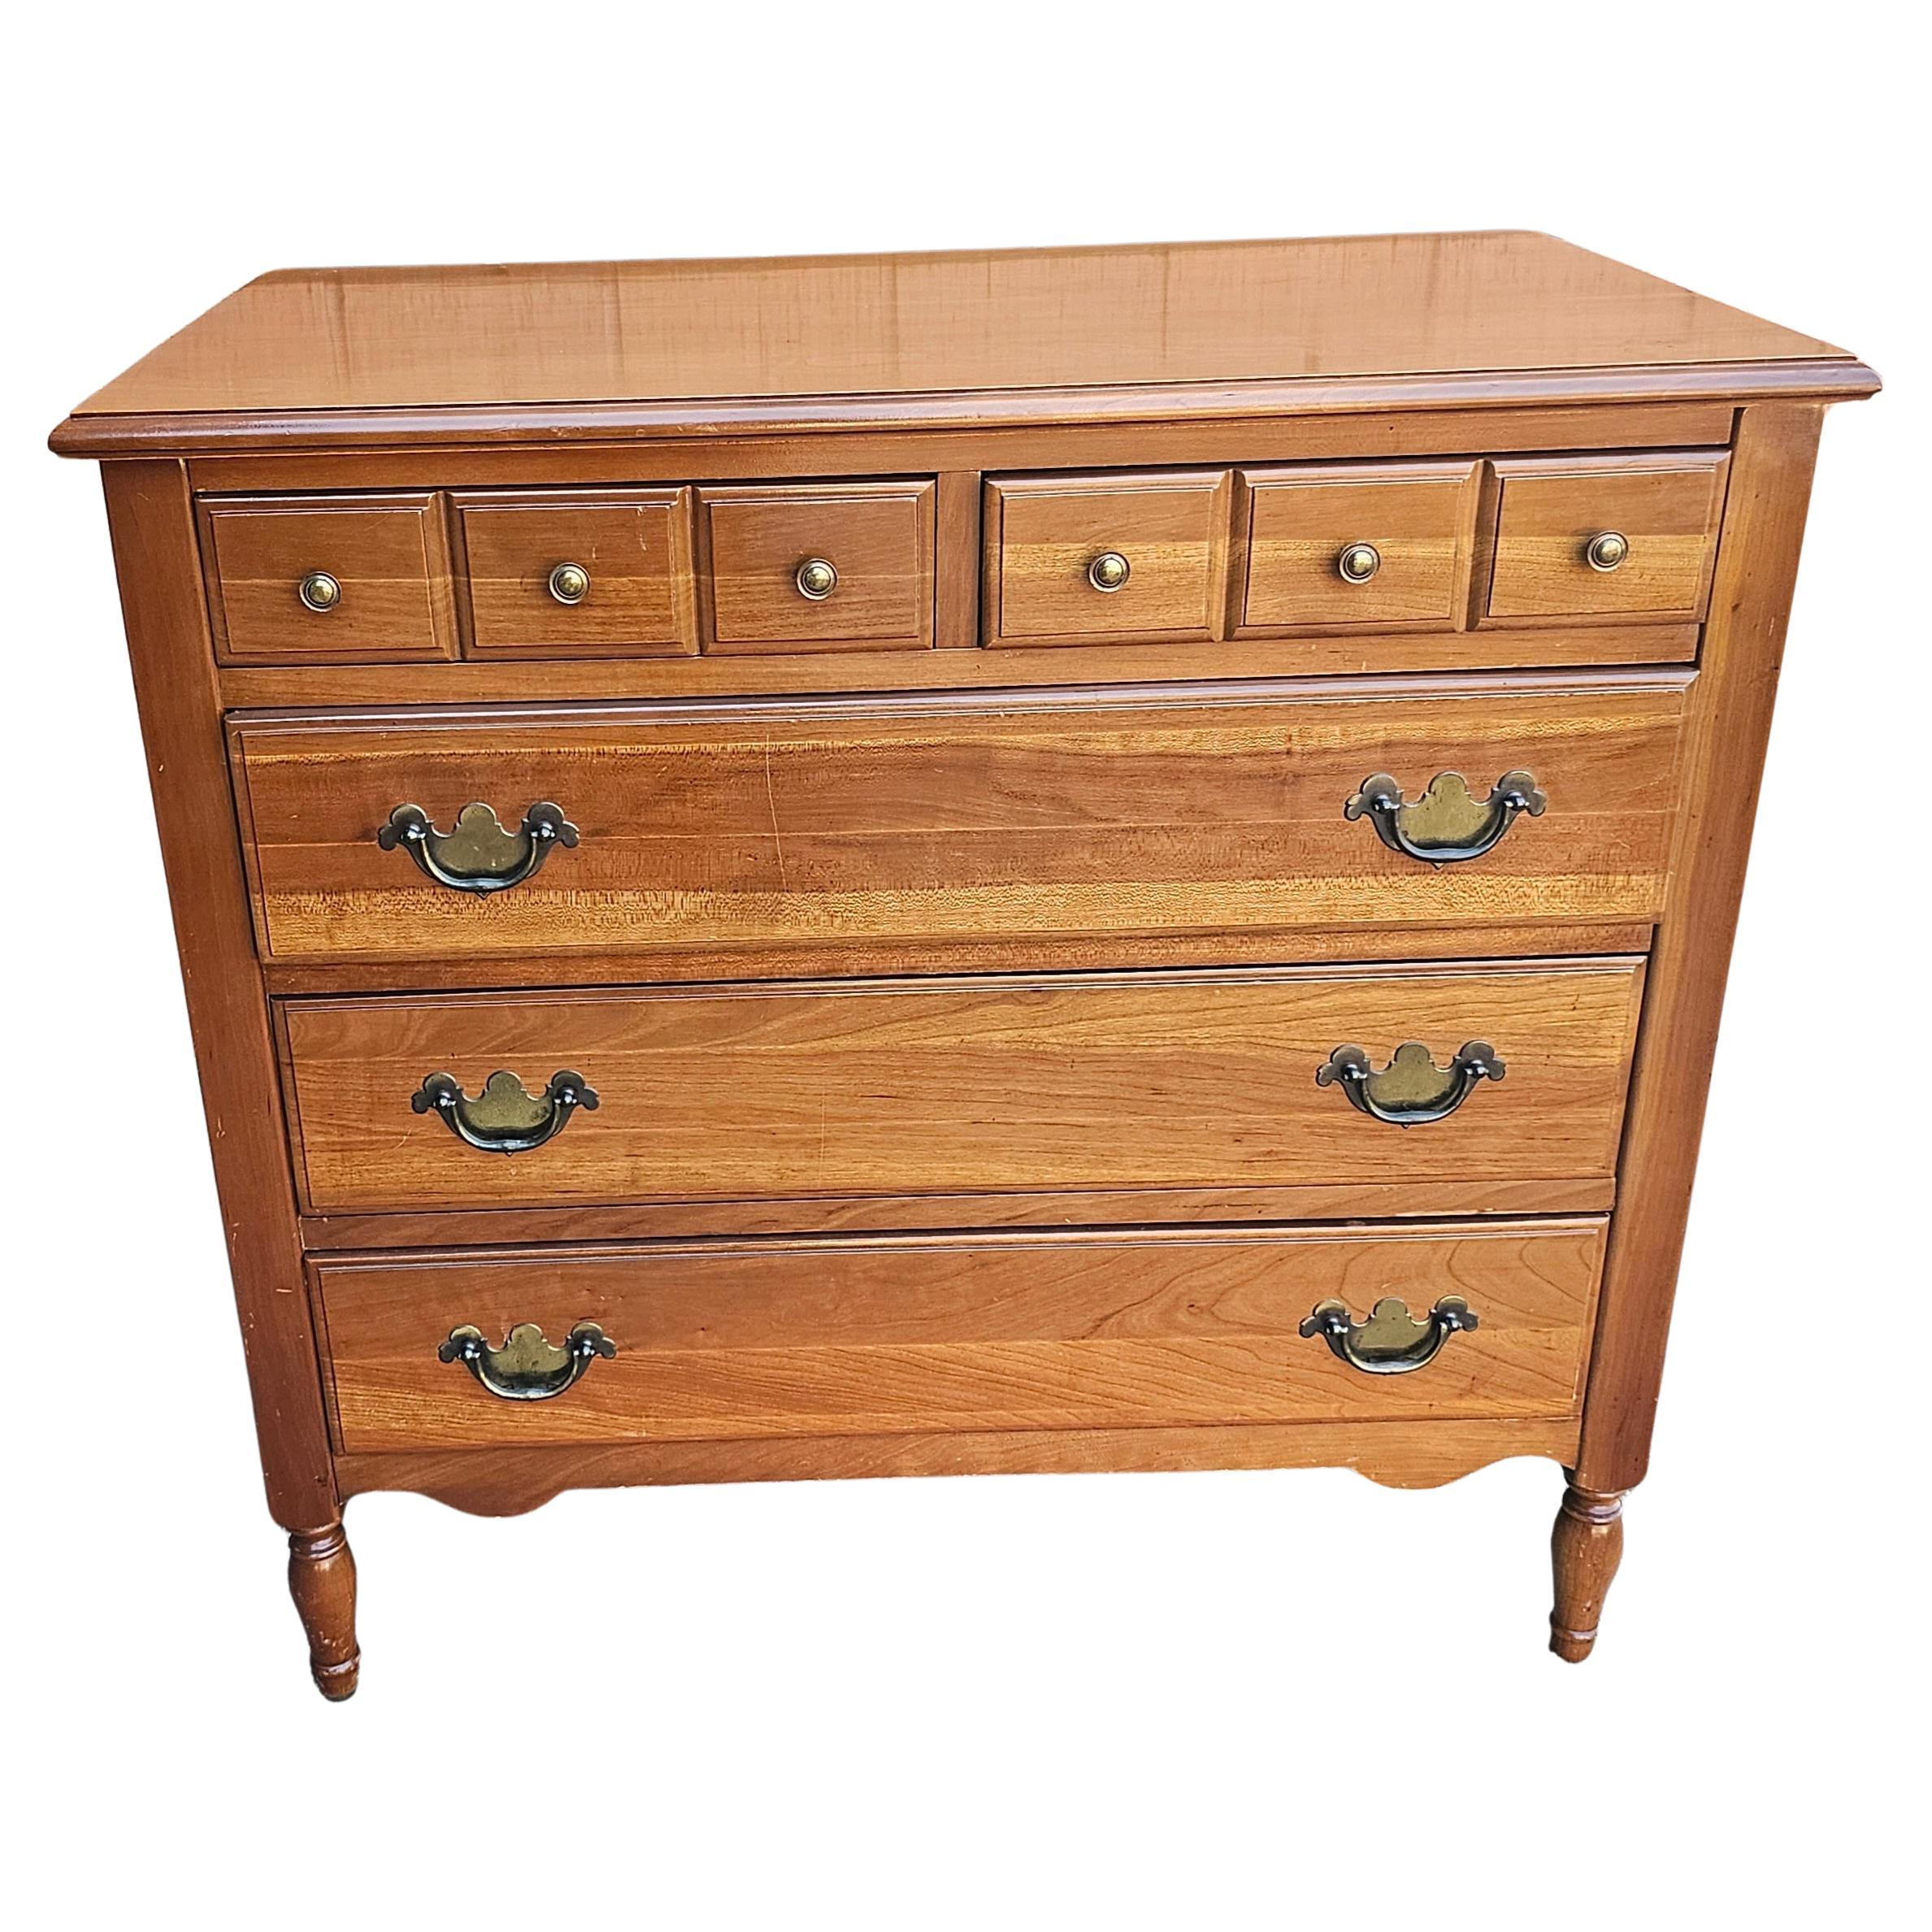 Mid 20th C. Permacraft Sanford Furniture Five-Drawer Bachelor Chest of Drawers For Sale